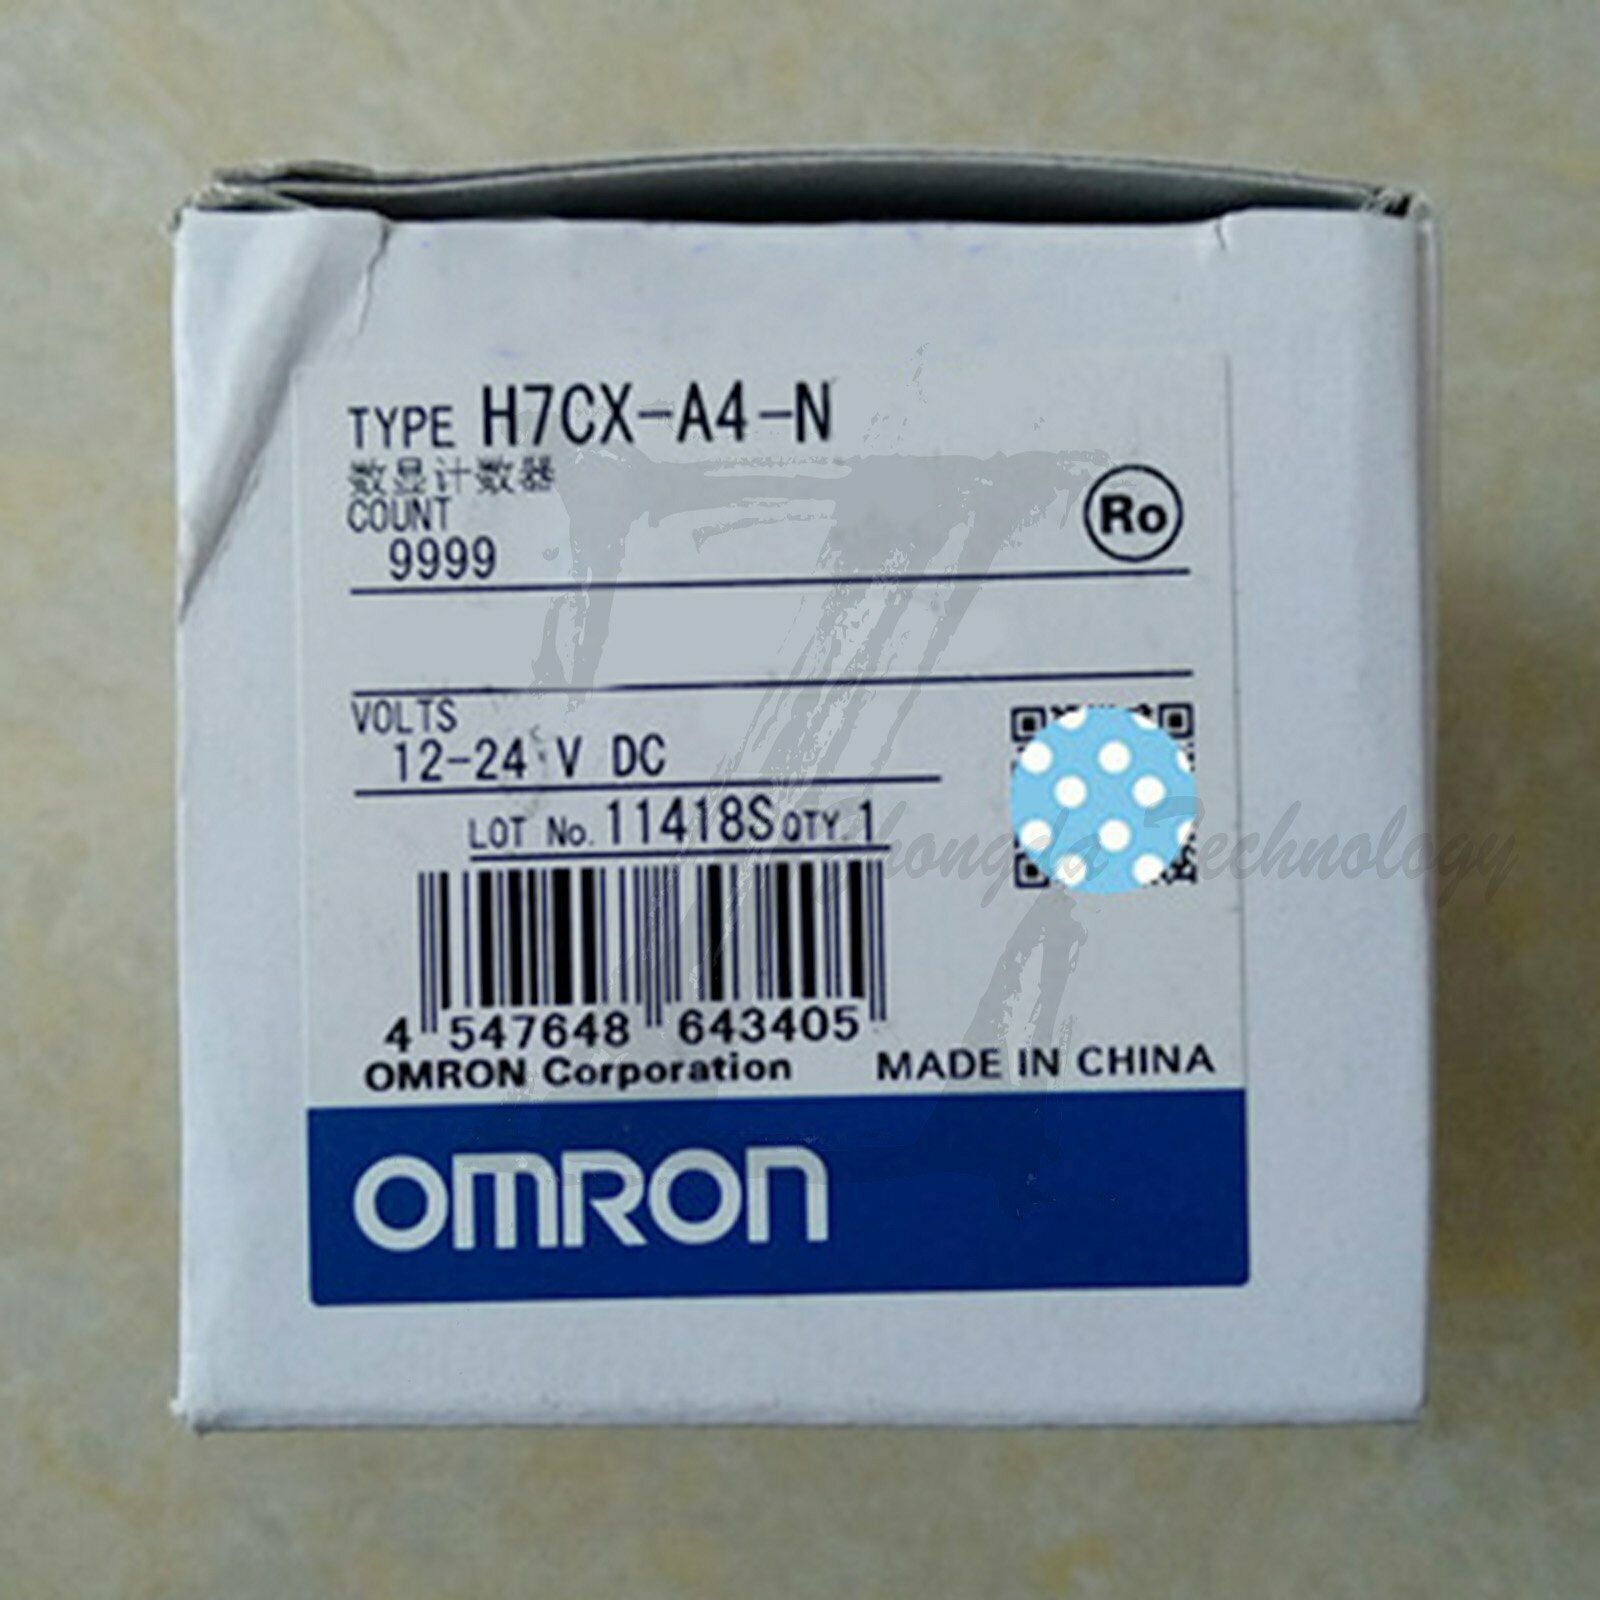 1pc new Omron H7CX-A4-N module one year warranty KOEED 101-200, 80%, import_2020_10_10_031751, Omron, Other